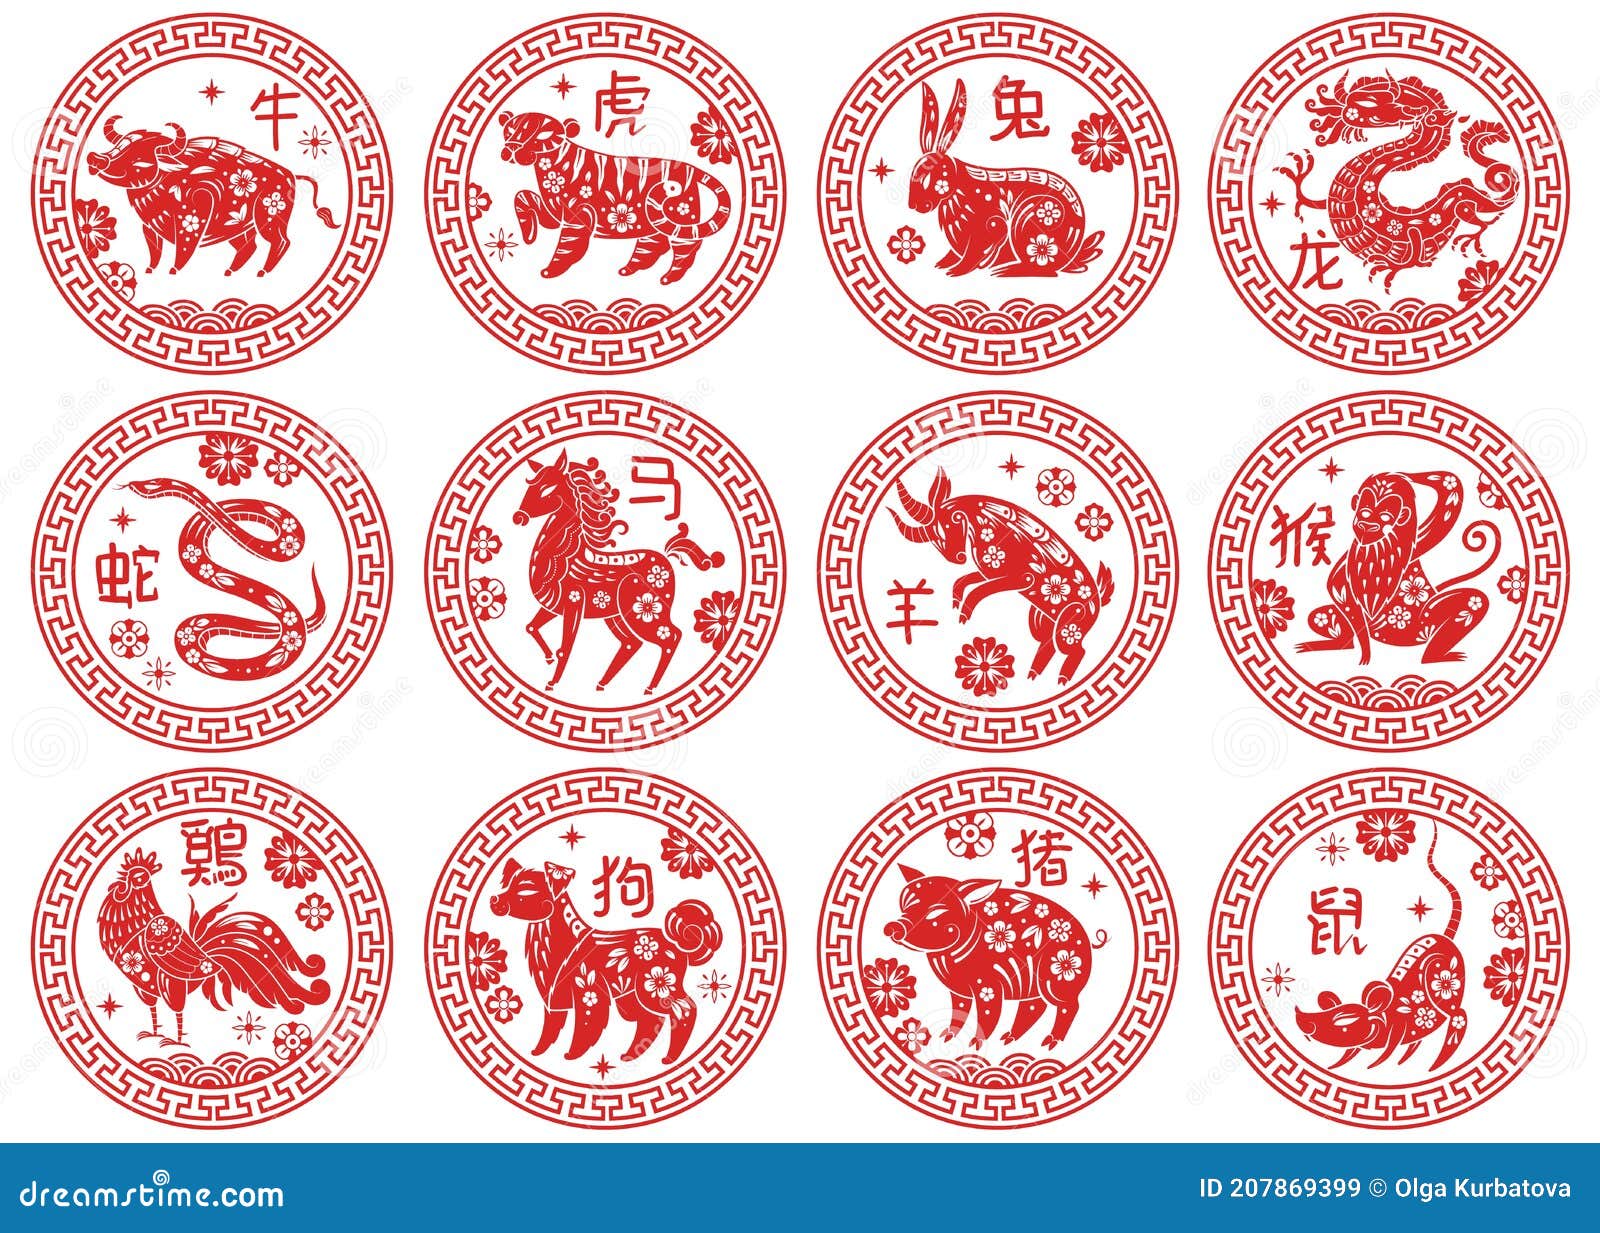 Round Frames Chinese Zodiac Signs. Animals Types of Astrological Calendar,  Asian Horoscope, Traditional Decor Twelve Stock Image - Image of lunar,  snake: 207869399